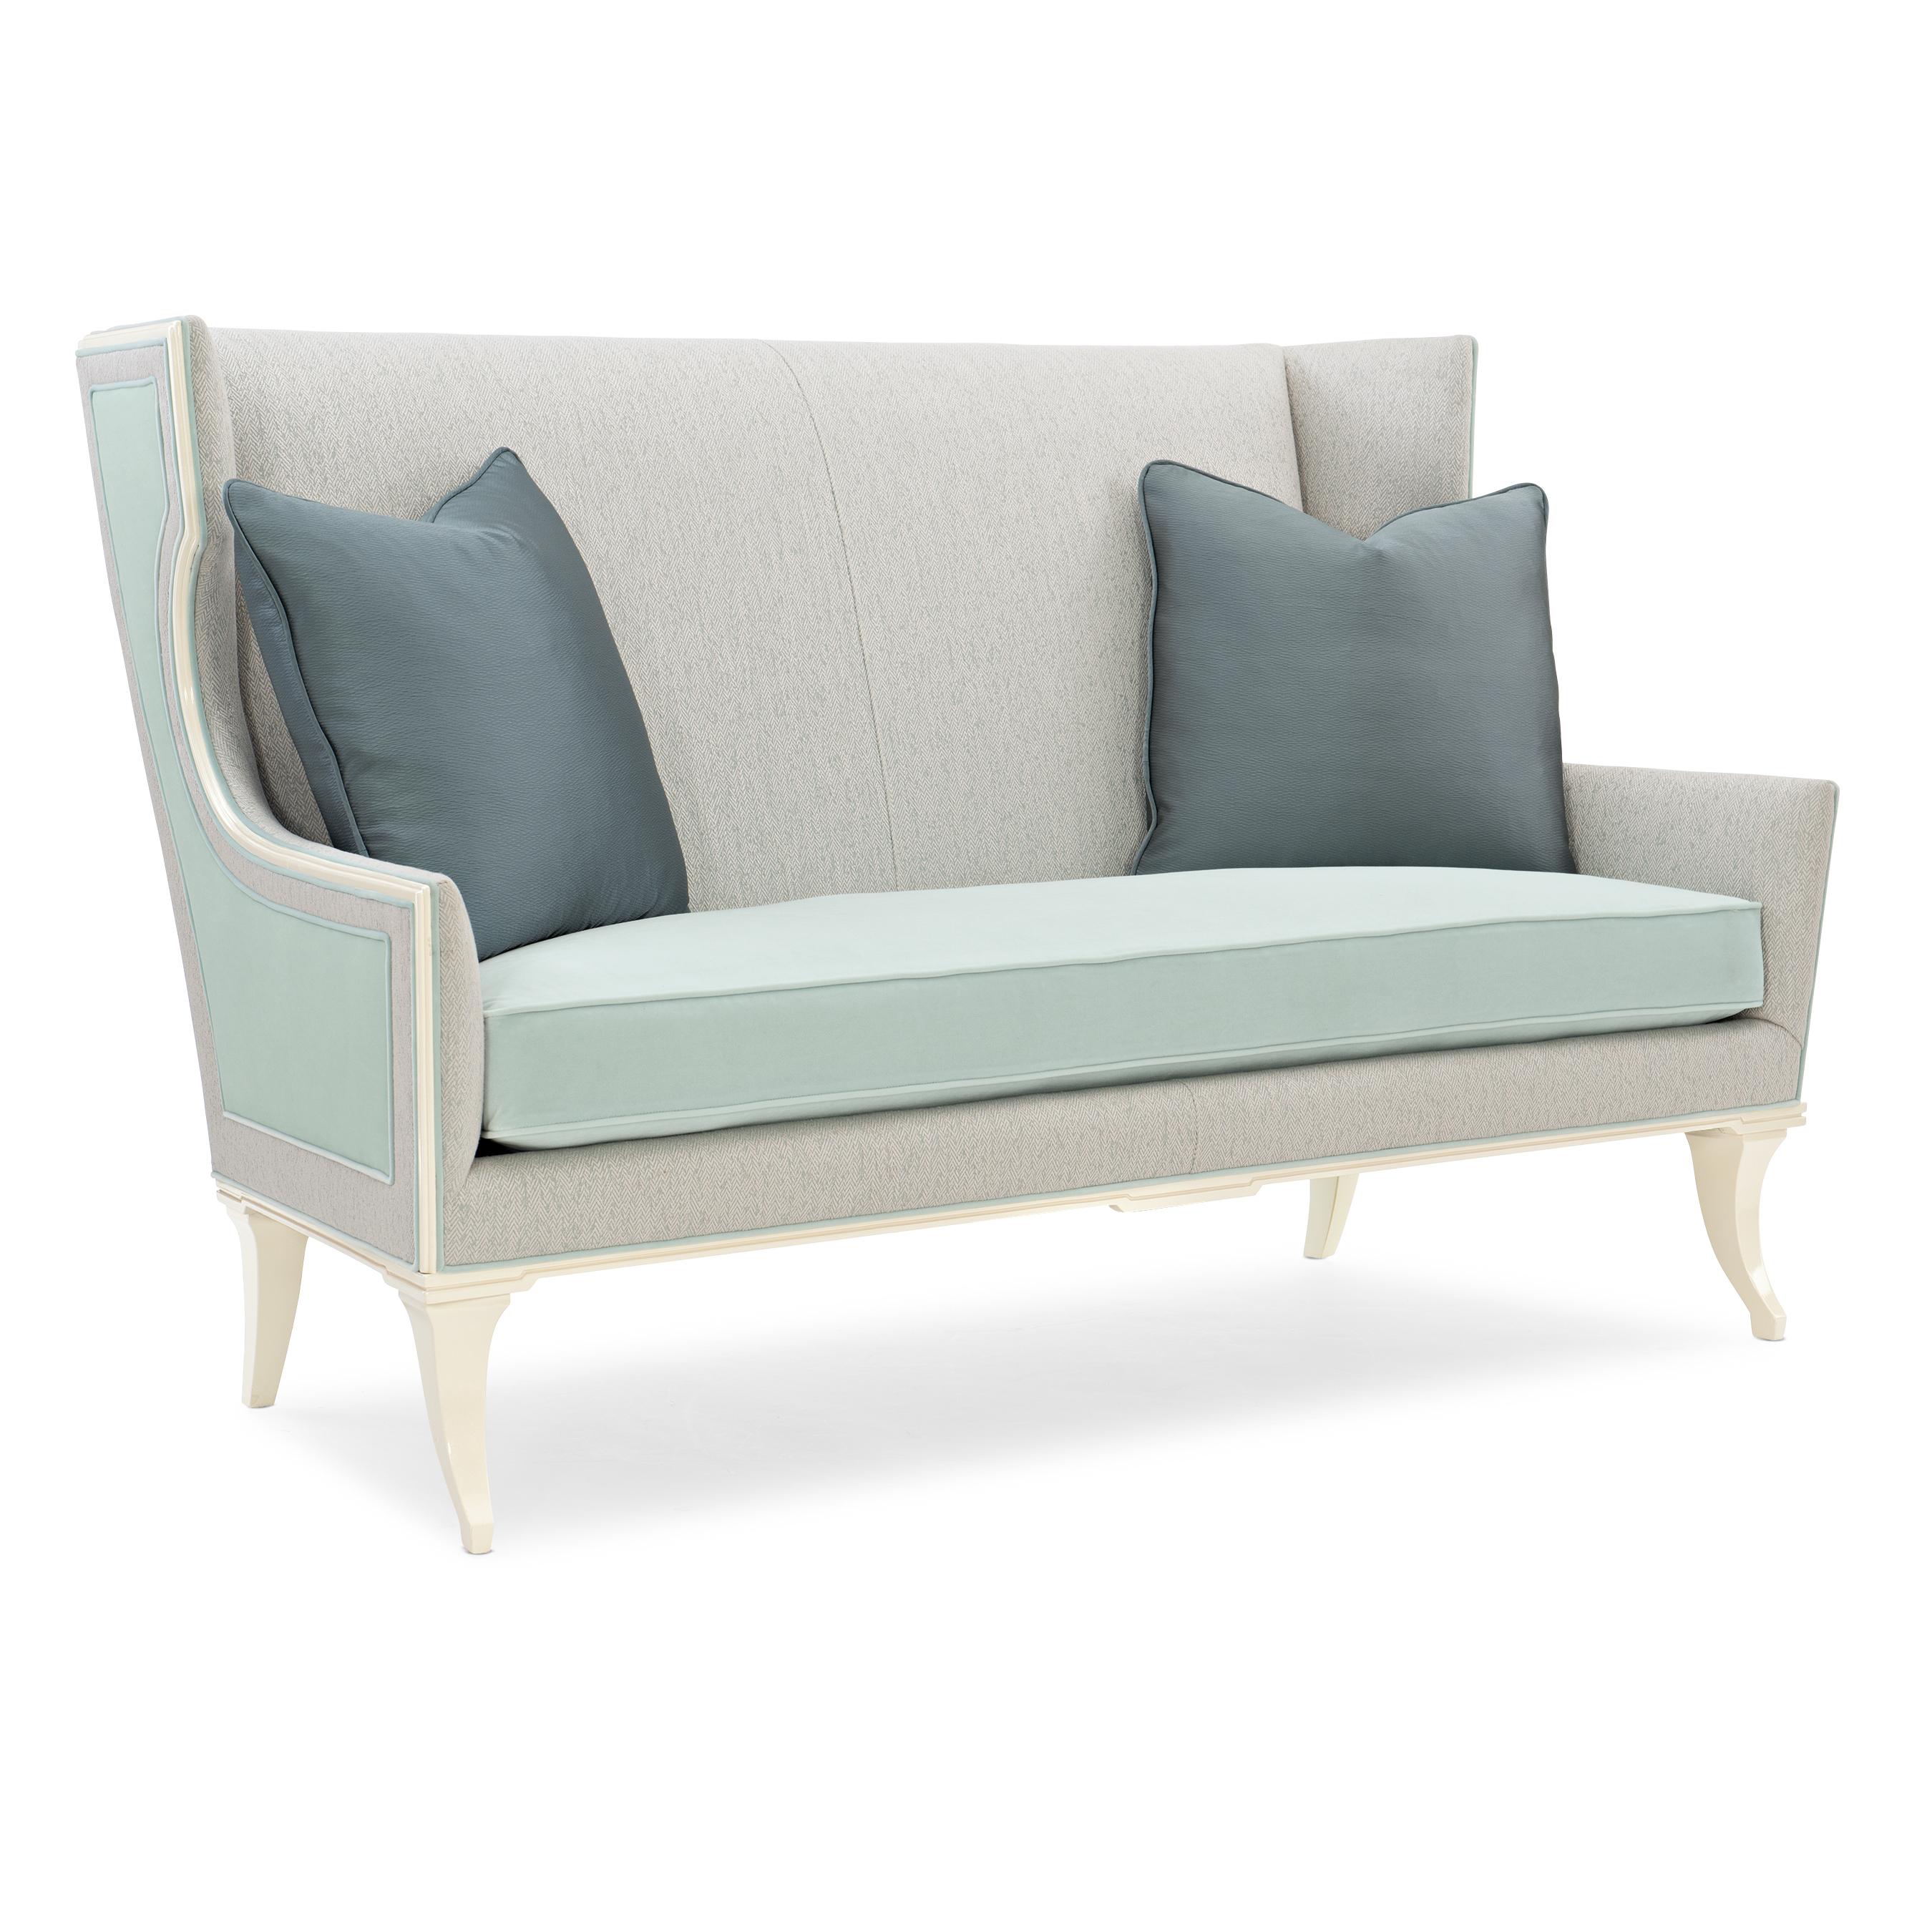 Traditional Loveseat Tea Time UPH-419-081-A in Light Blue, Light Gray Fabric